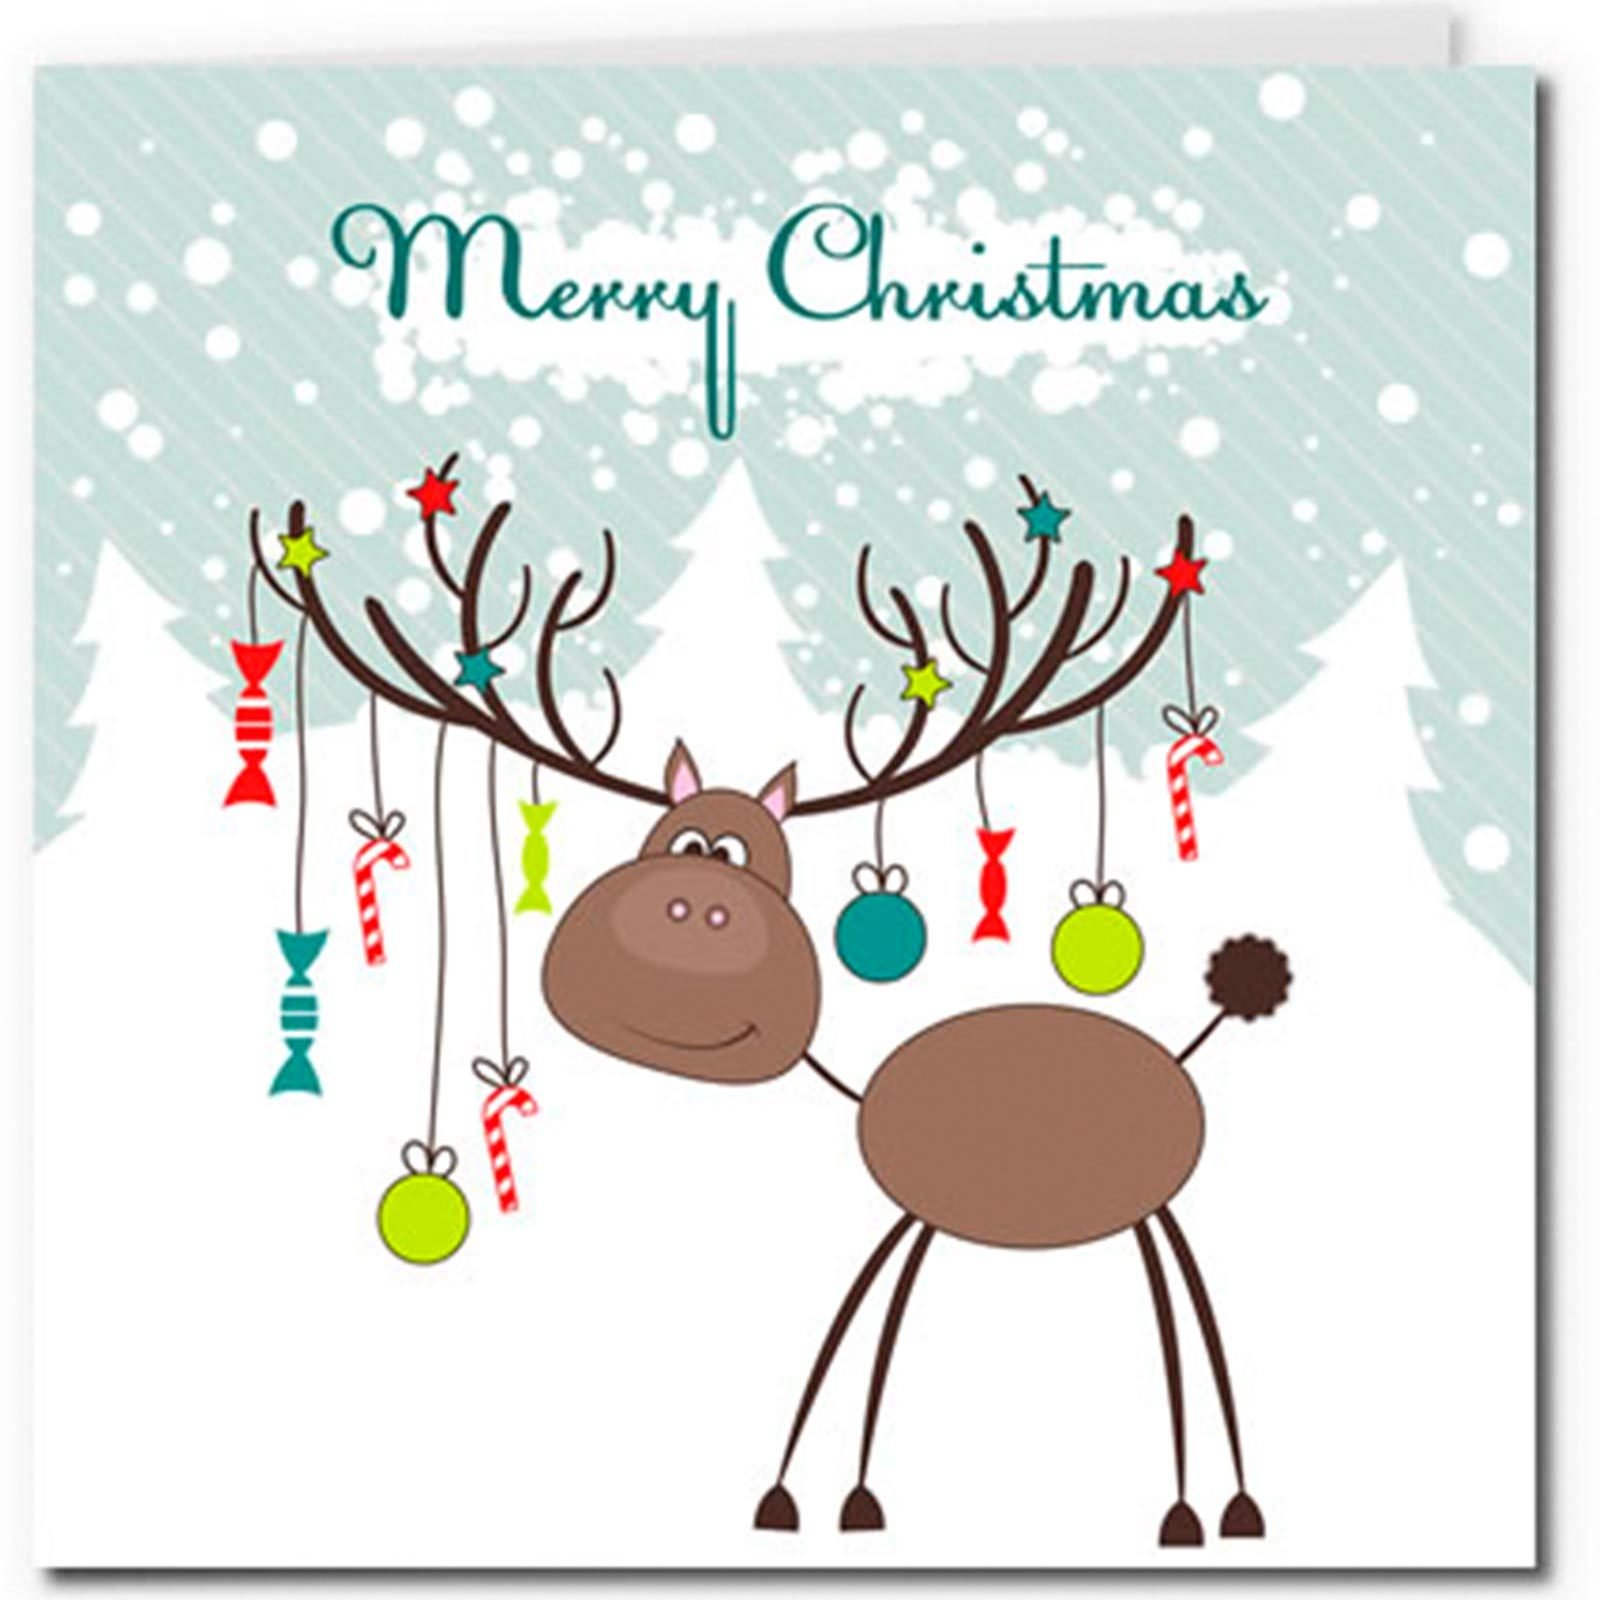 Free Christmas Cards to Print Out and Send This Year Reader's Digest